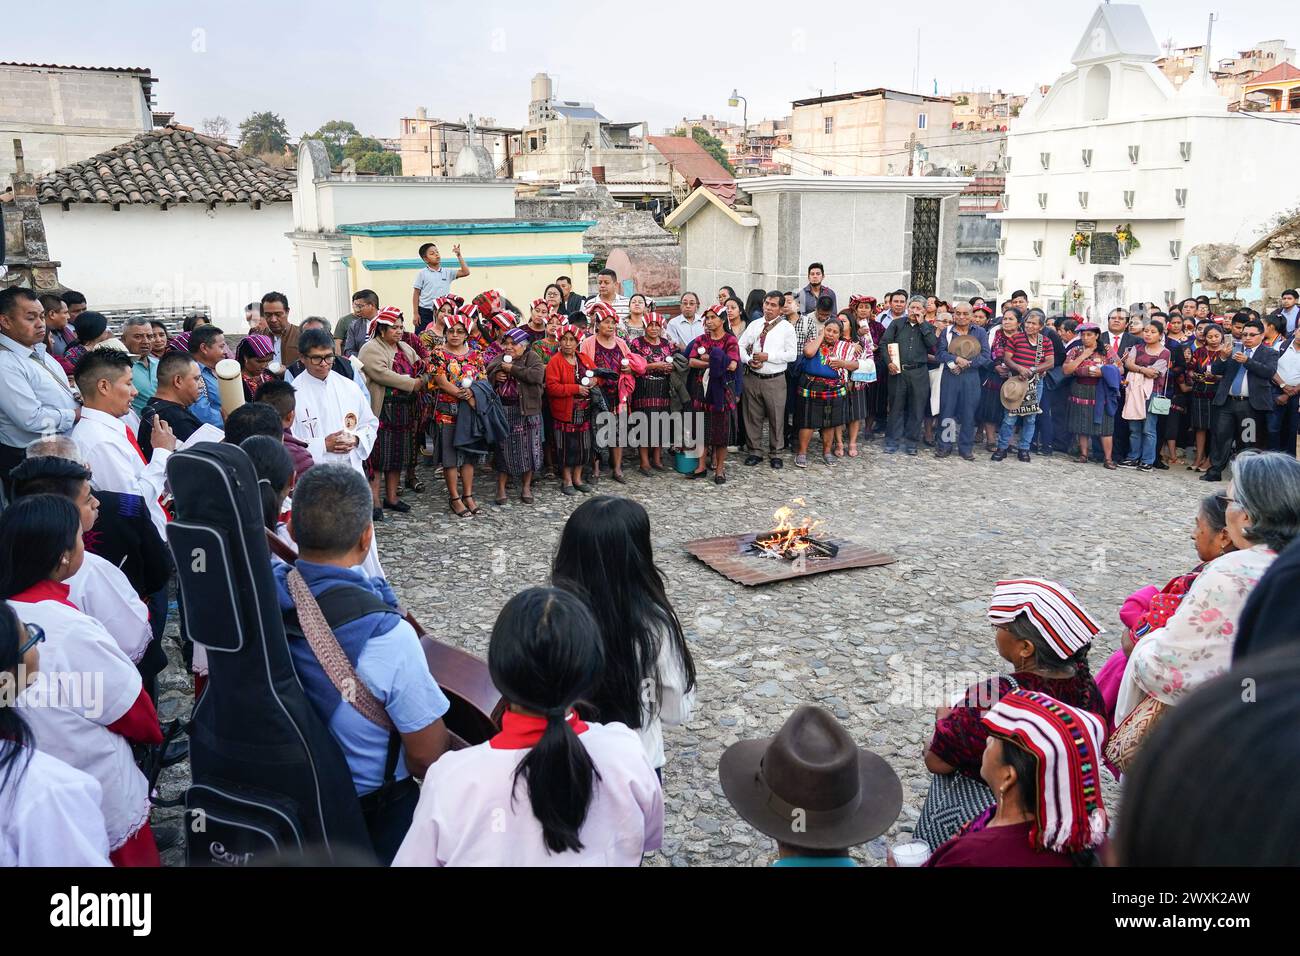 Chichicastenango, Guatemala. 30th Mar, 2024. A Catholic priest leads a Christian and Mayan ceremony at the start of a candlelit vigil for Jesus on Holy Saturday at the Cementerio De Chichicastenango, March 30, 2024 in Chichicastenango, Guatemala. The Catholic Church and Mayan beliefs long ago mixed together in indigenous regions of Guatemala in a process called syncretism. Credit: Richard Ellis/Richard Ellis/Alamy Live News Stock Photo